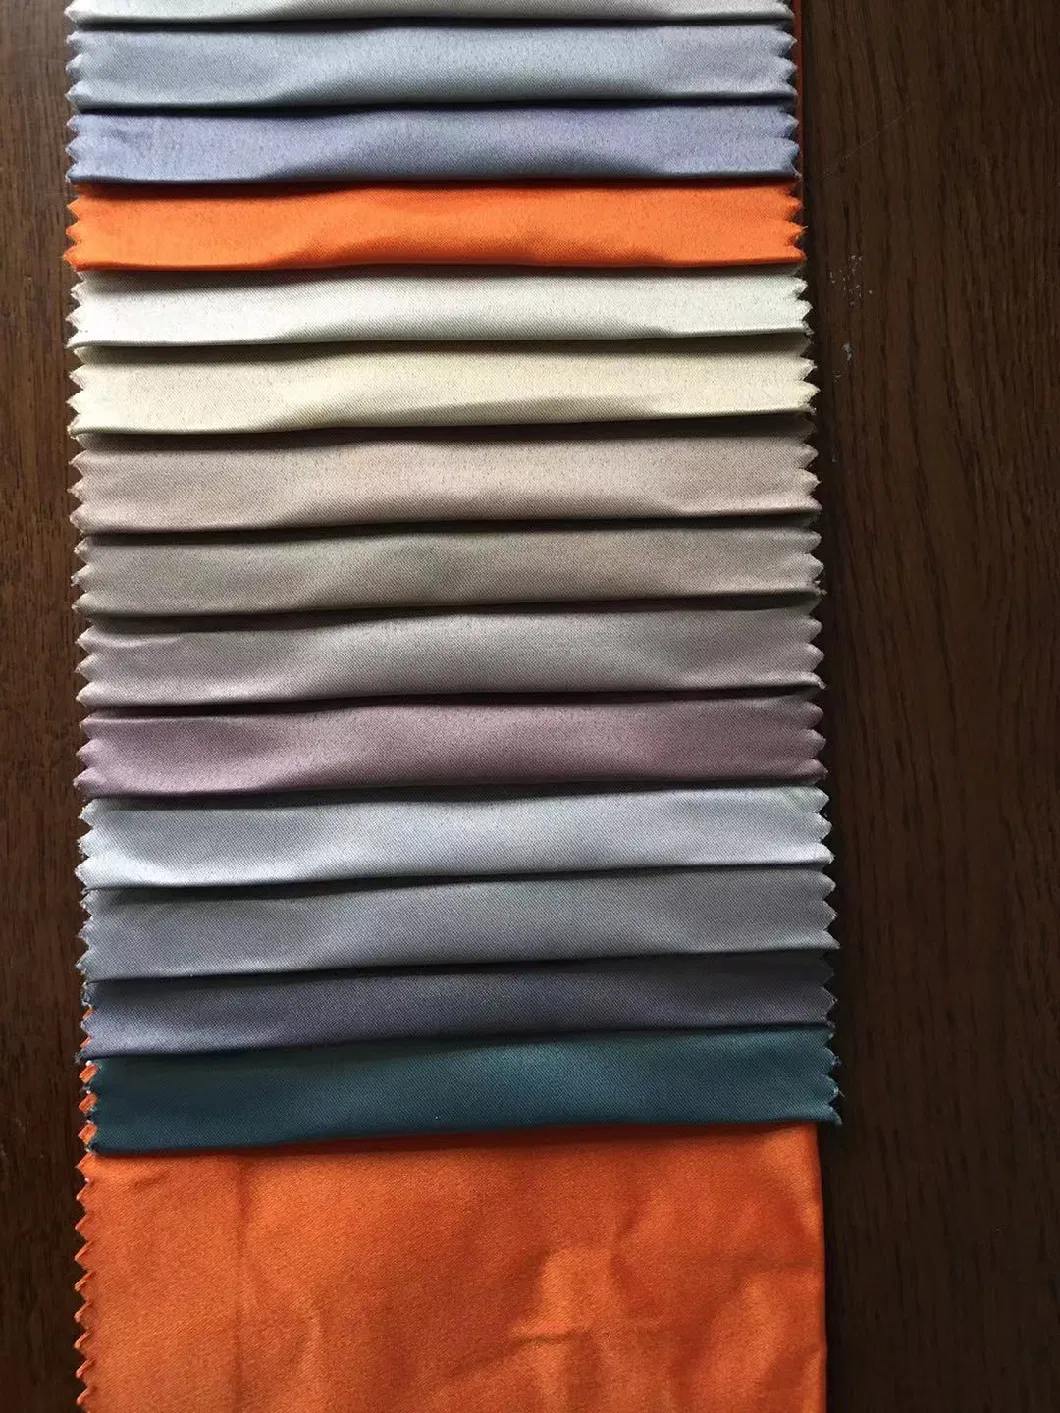 C6 100%Polyester Blackout Curtain Fabric